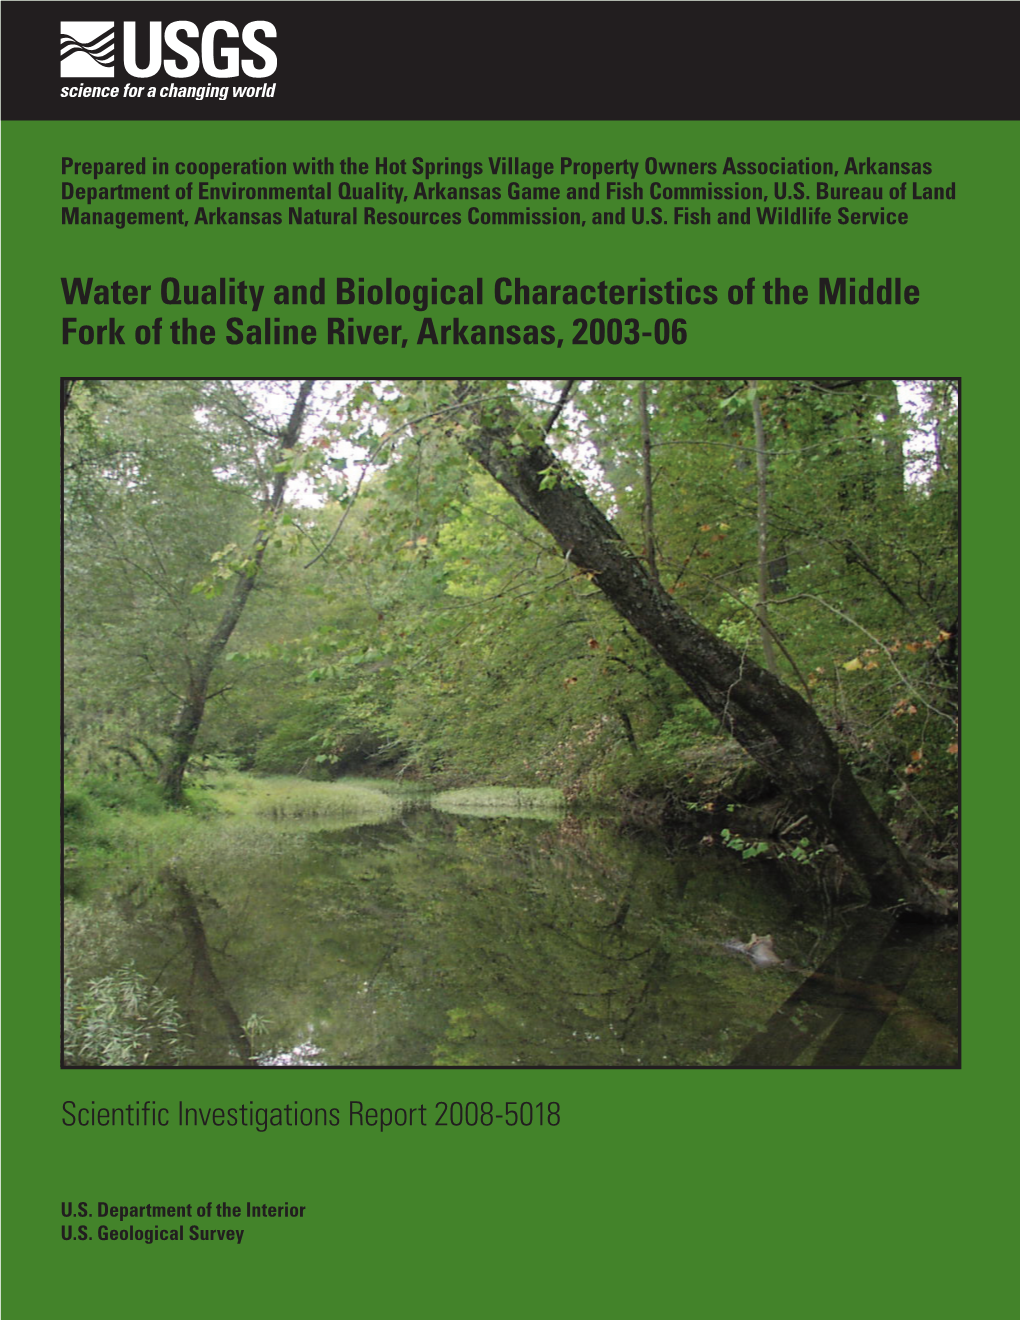 Water Quality and Biological Characteristics of the Middle Fork of the Saline River, Arkansas, 2003-06